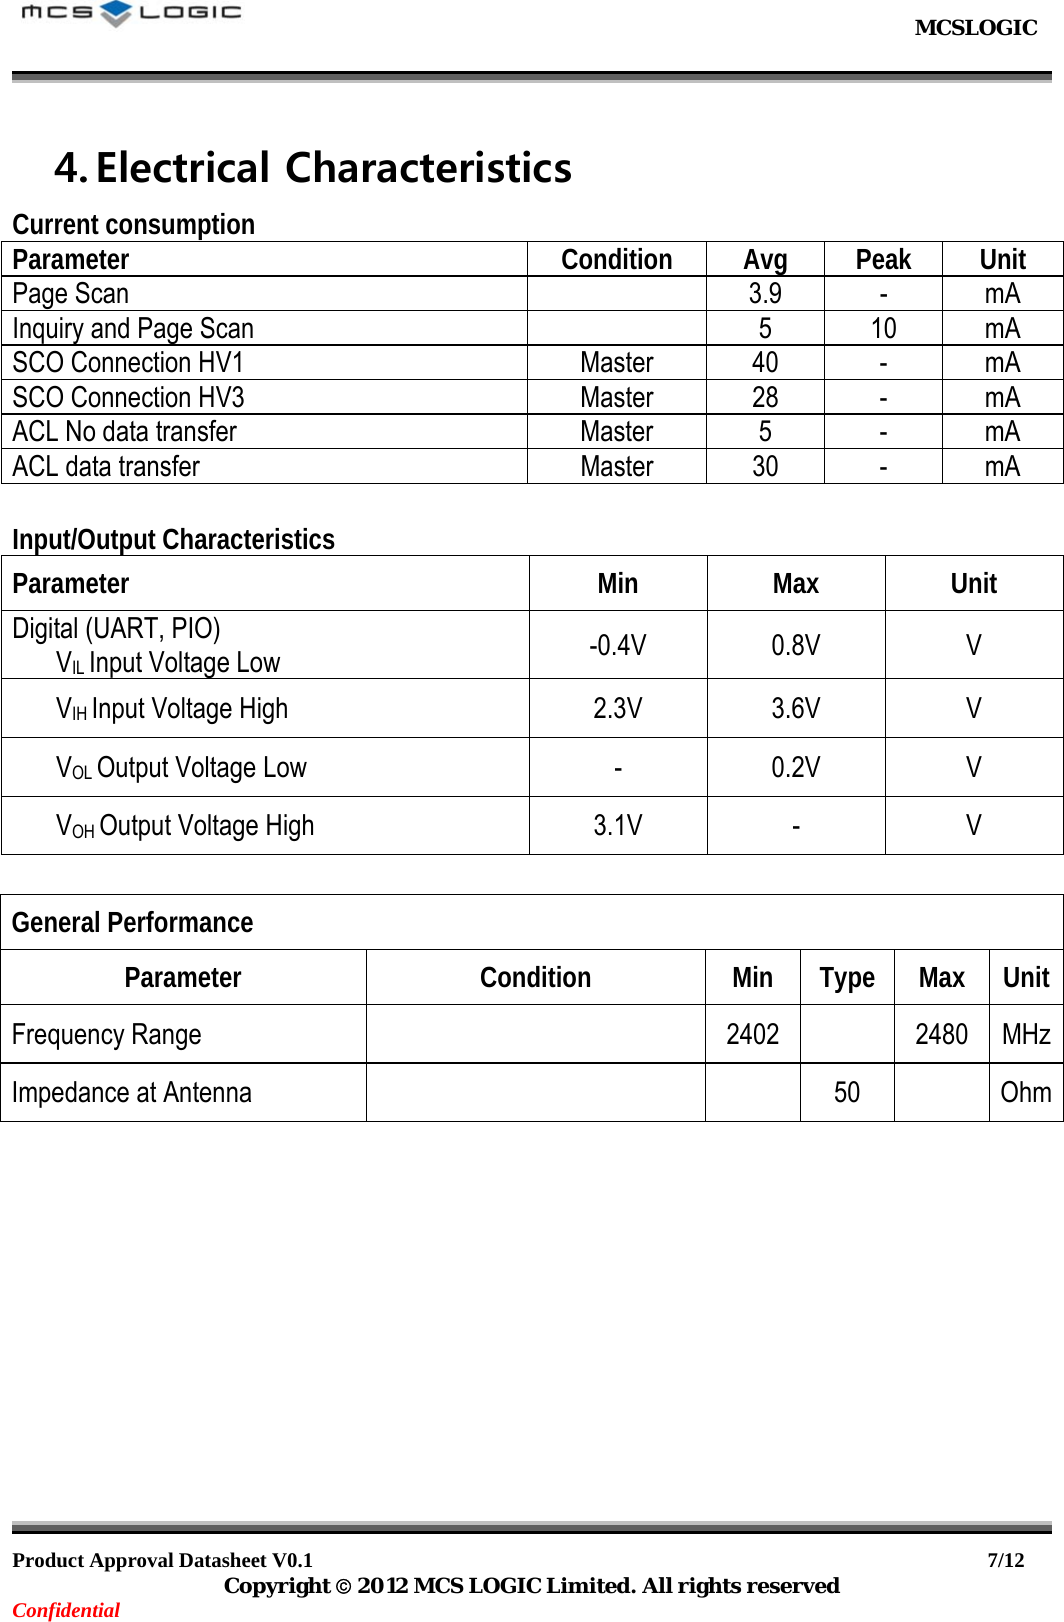                                                           MCSLOGIC                                                                                     Product Approval Datasheet V0.1                                                                  7/12 Copyright  2012 MCS LOGIC Limited. All rights reserved Confidential 4. Electrical Characteristics Current consumption Parameter Condition Avg Peak Unit Page Scan    3.9  -  mA Inquiry and Page Scan    5  10  mA SCO Connection HV1  Master  40  -  mA SCO Connection HV3  Master  28  -  mA ACL No data transfer  Master  5  -  mA ACL data transfer  Master  30  -  mA  Input/Output Characteristics Parameter Min Max Unit Digital (UART, PIO)    VIL Input Voltage Low  -0.4V 0.8V  V VIH Input Voltage High  2.3V  3.6V  V VOL Output Voltage Low  -  0.2V  V VOH Output Voltage High  3.1V  -  V  General Performance Parameter Condition Min Type Max Unit Frequency Range    2402  2480 MHz Impedance at Antenna      50    Ohm  